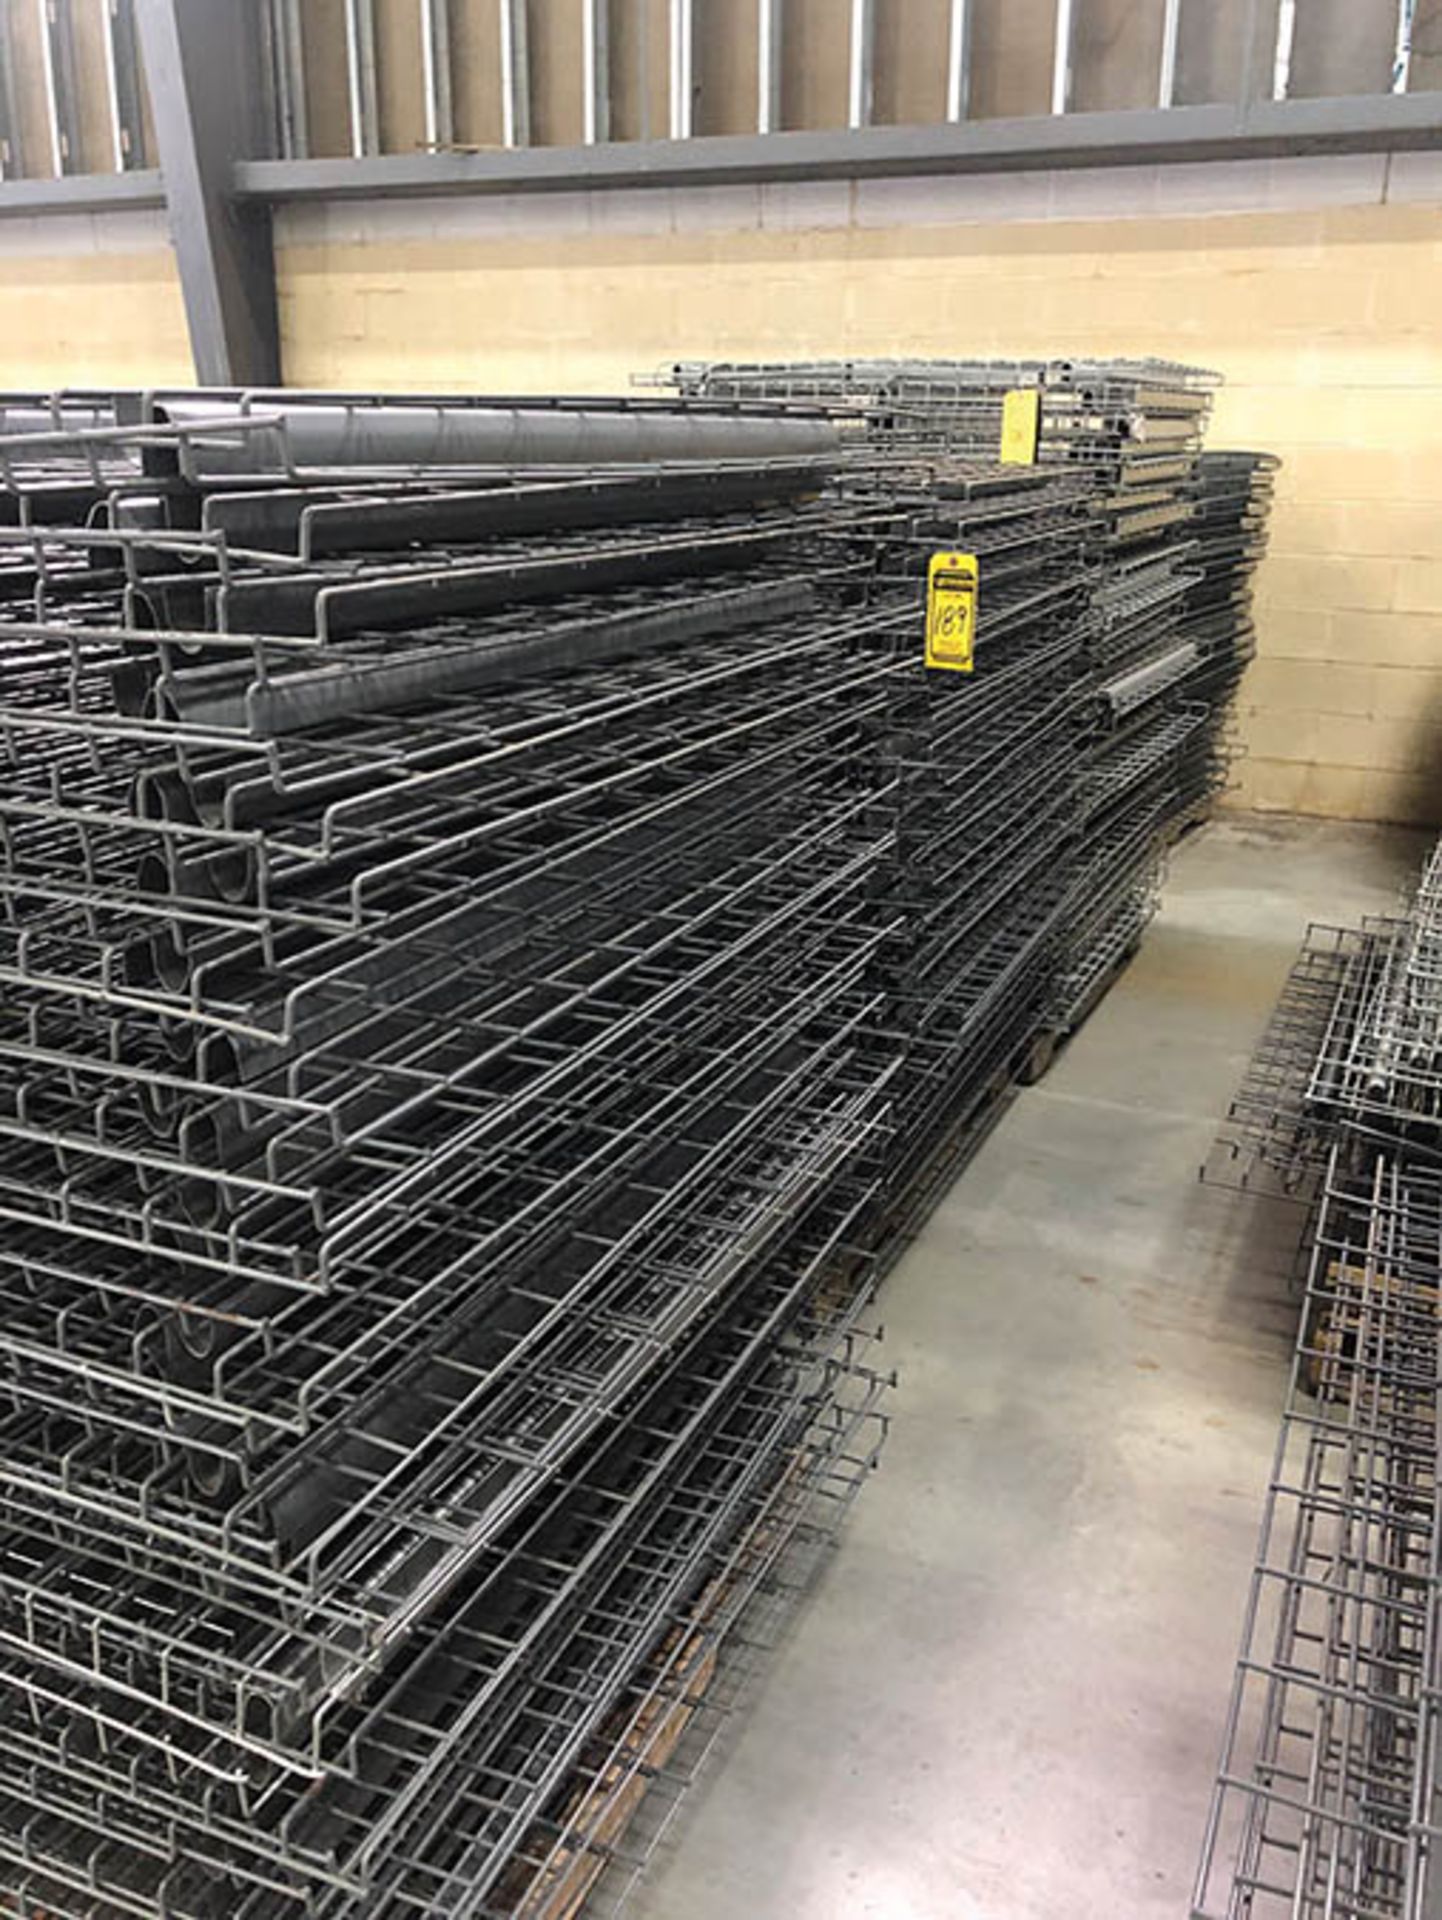 (X196) SECTIONS OF WIRE DECKING 45'` X 44'' X 1'` DEEP - Image 2 of 3